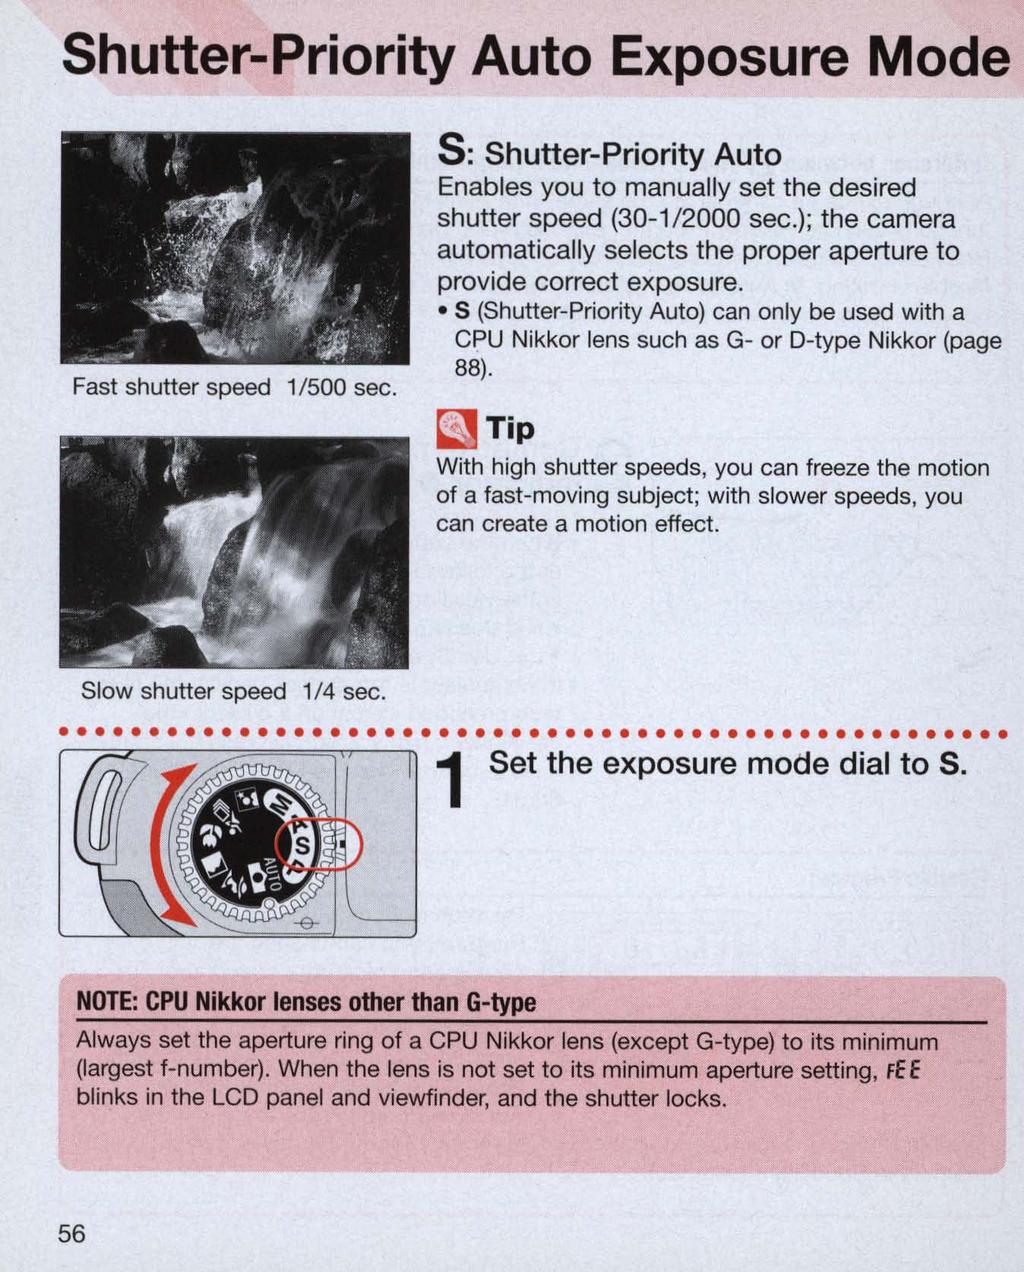 Shutter-Priority Auto Exposure Mode Fast shutter speed 1/500 sec. s: Shutter-Priority Auto Enables you to manually set the desired shutter speed (30-1/2000 sec.